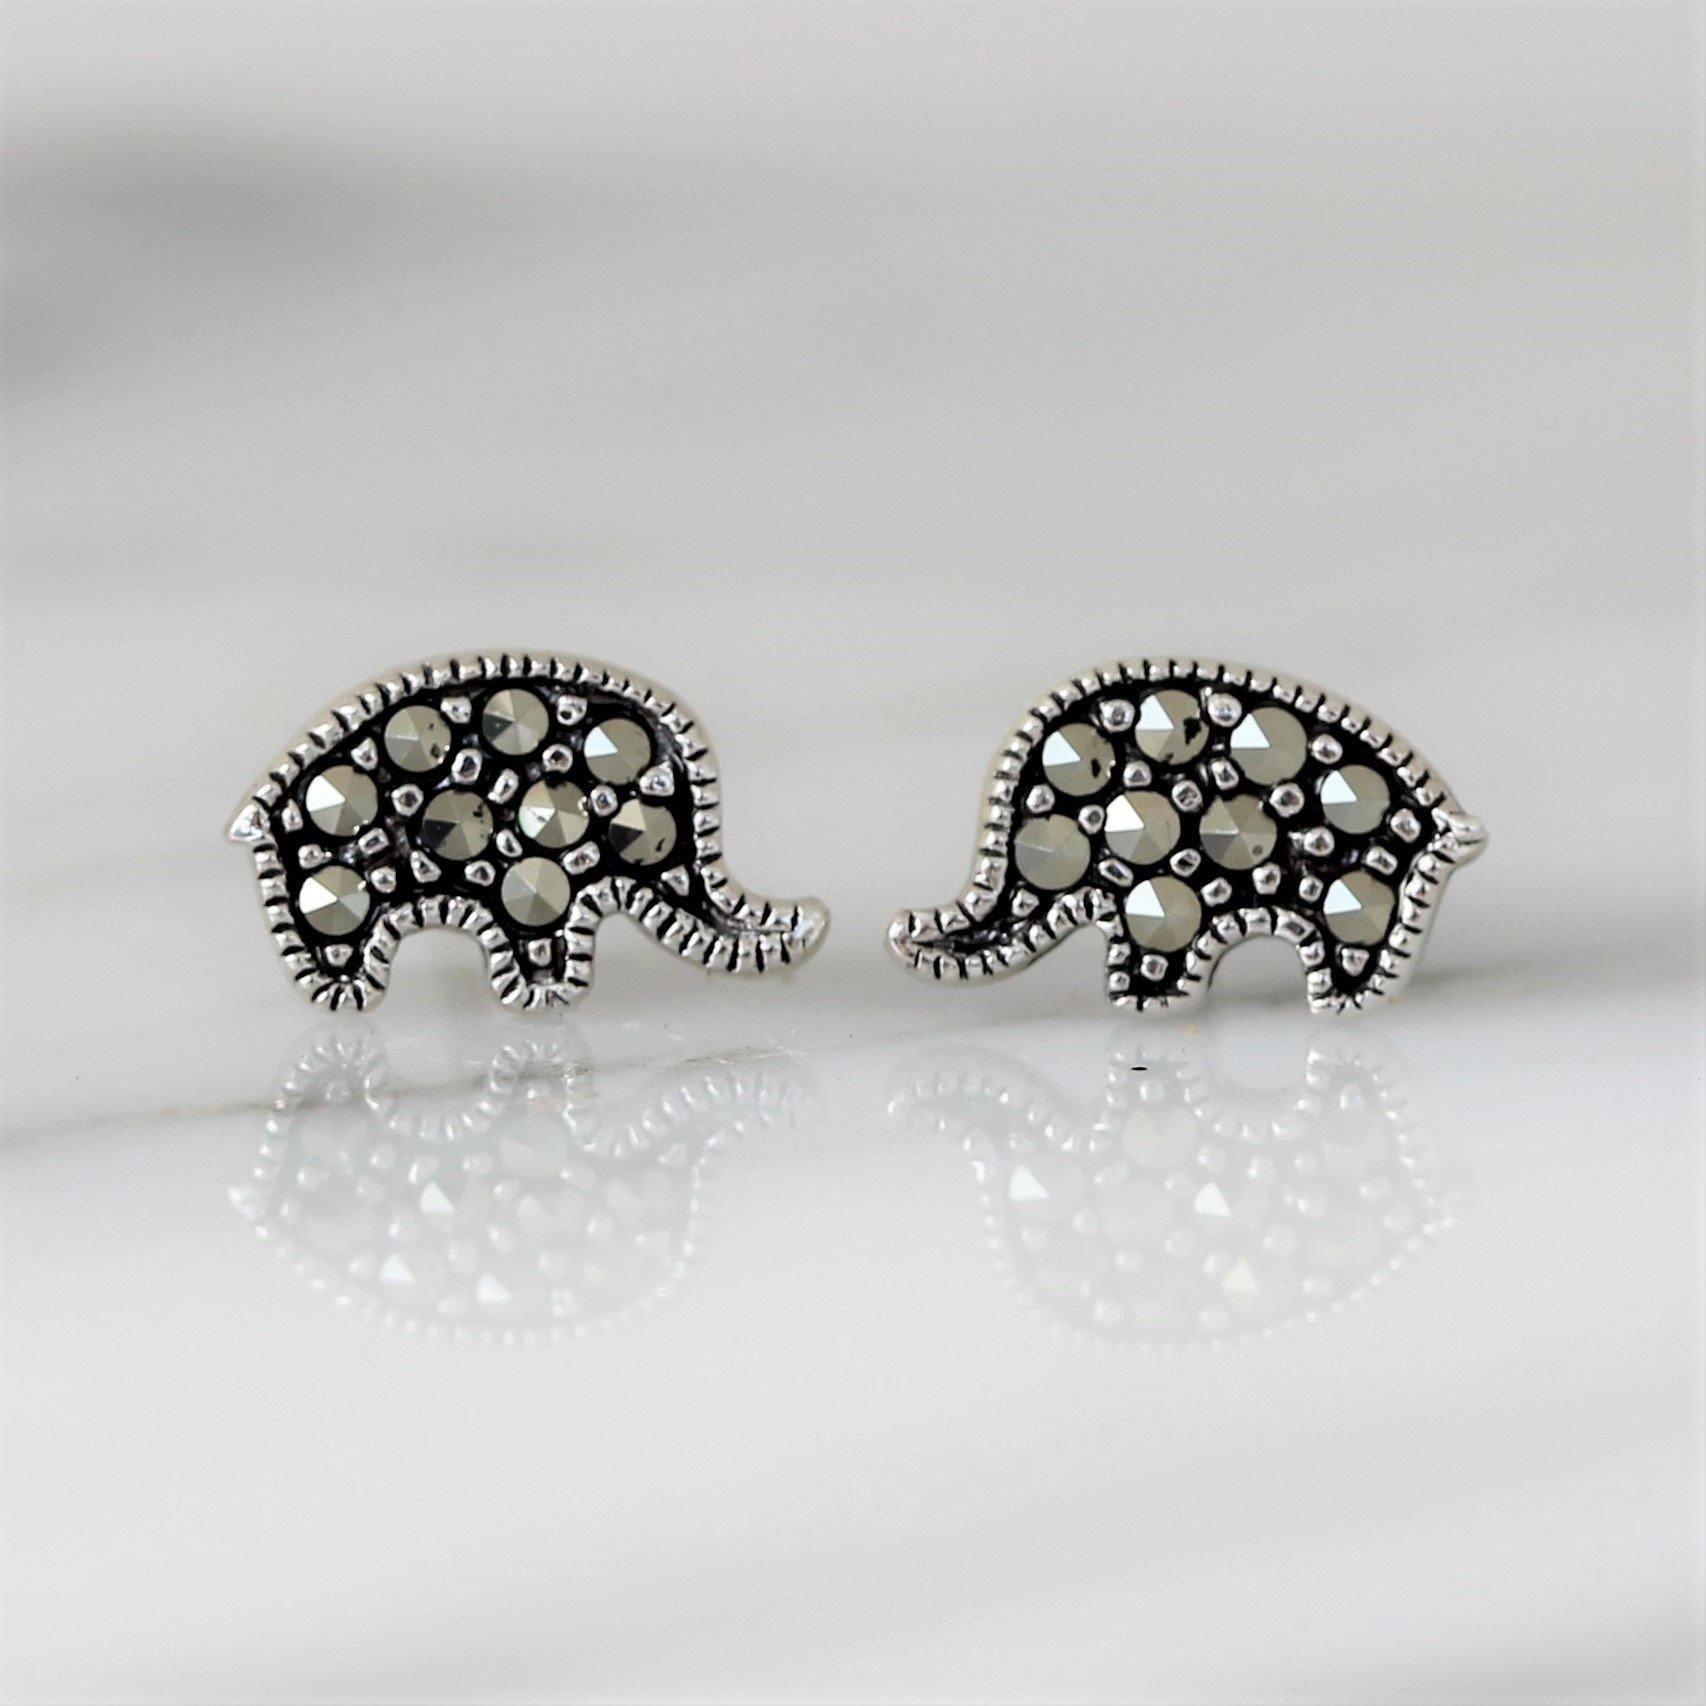 Sterling Silver Marcasite Elephant Earrings Studs Vintage Style - STERLING SILVER DESIGNS